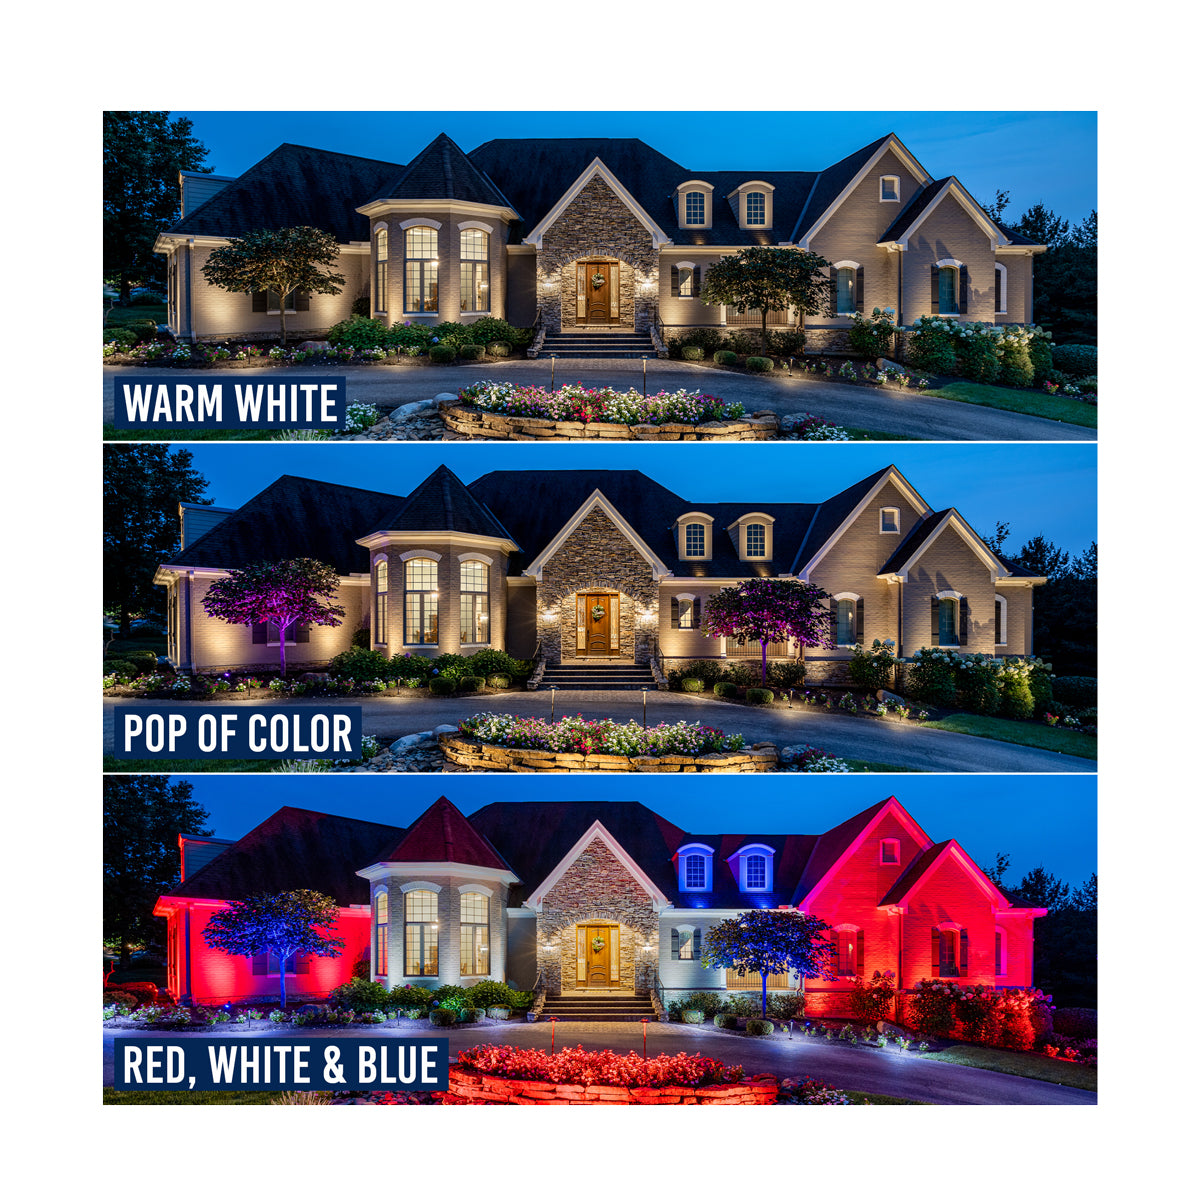 Outdoor lighting (LED) shown in multiple colors for holidays